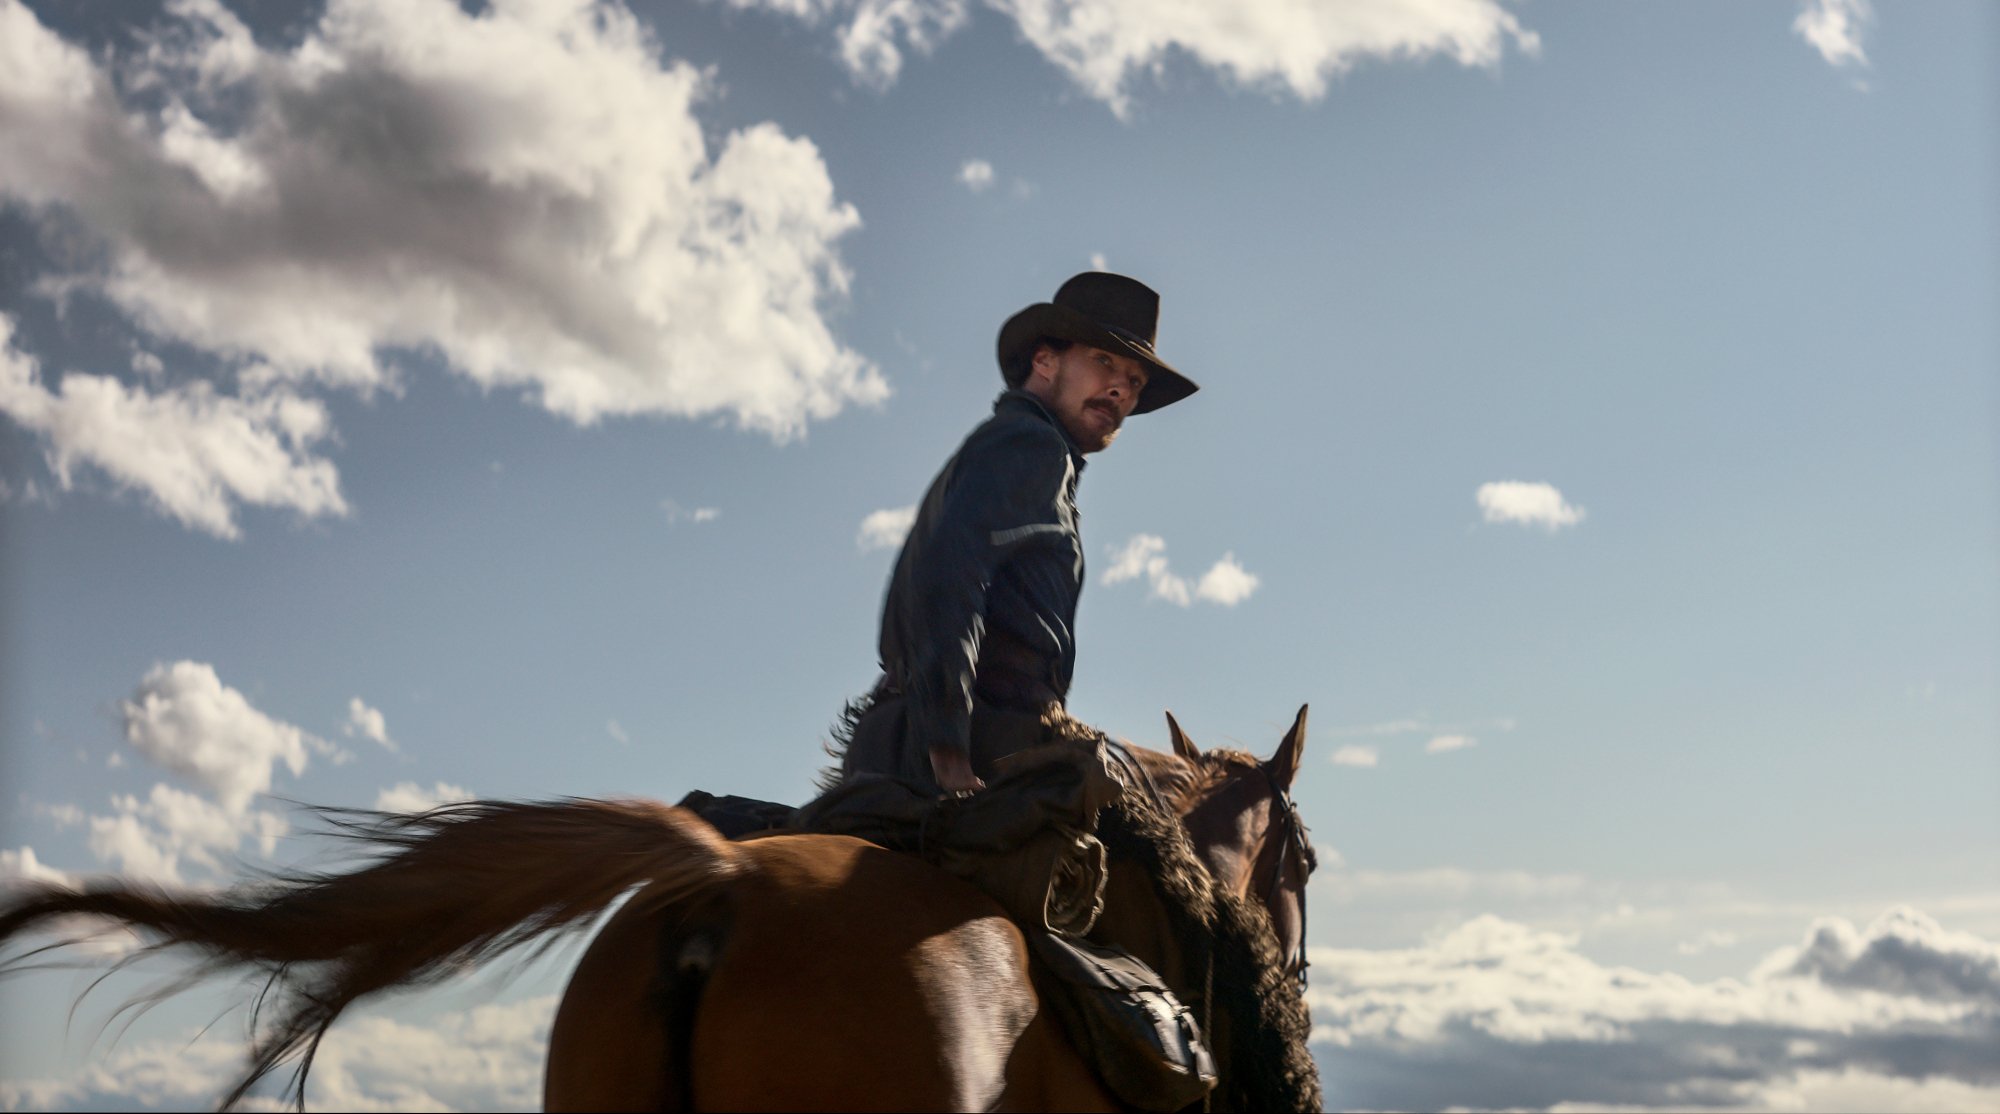 'The Power of the Dog' actor Benedict Cumberbatch as Phil Burbank riding on a horse looking back